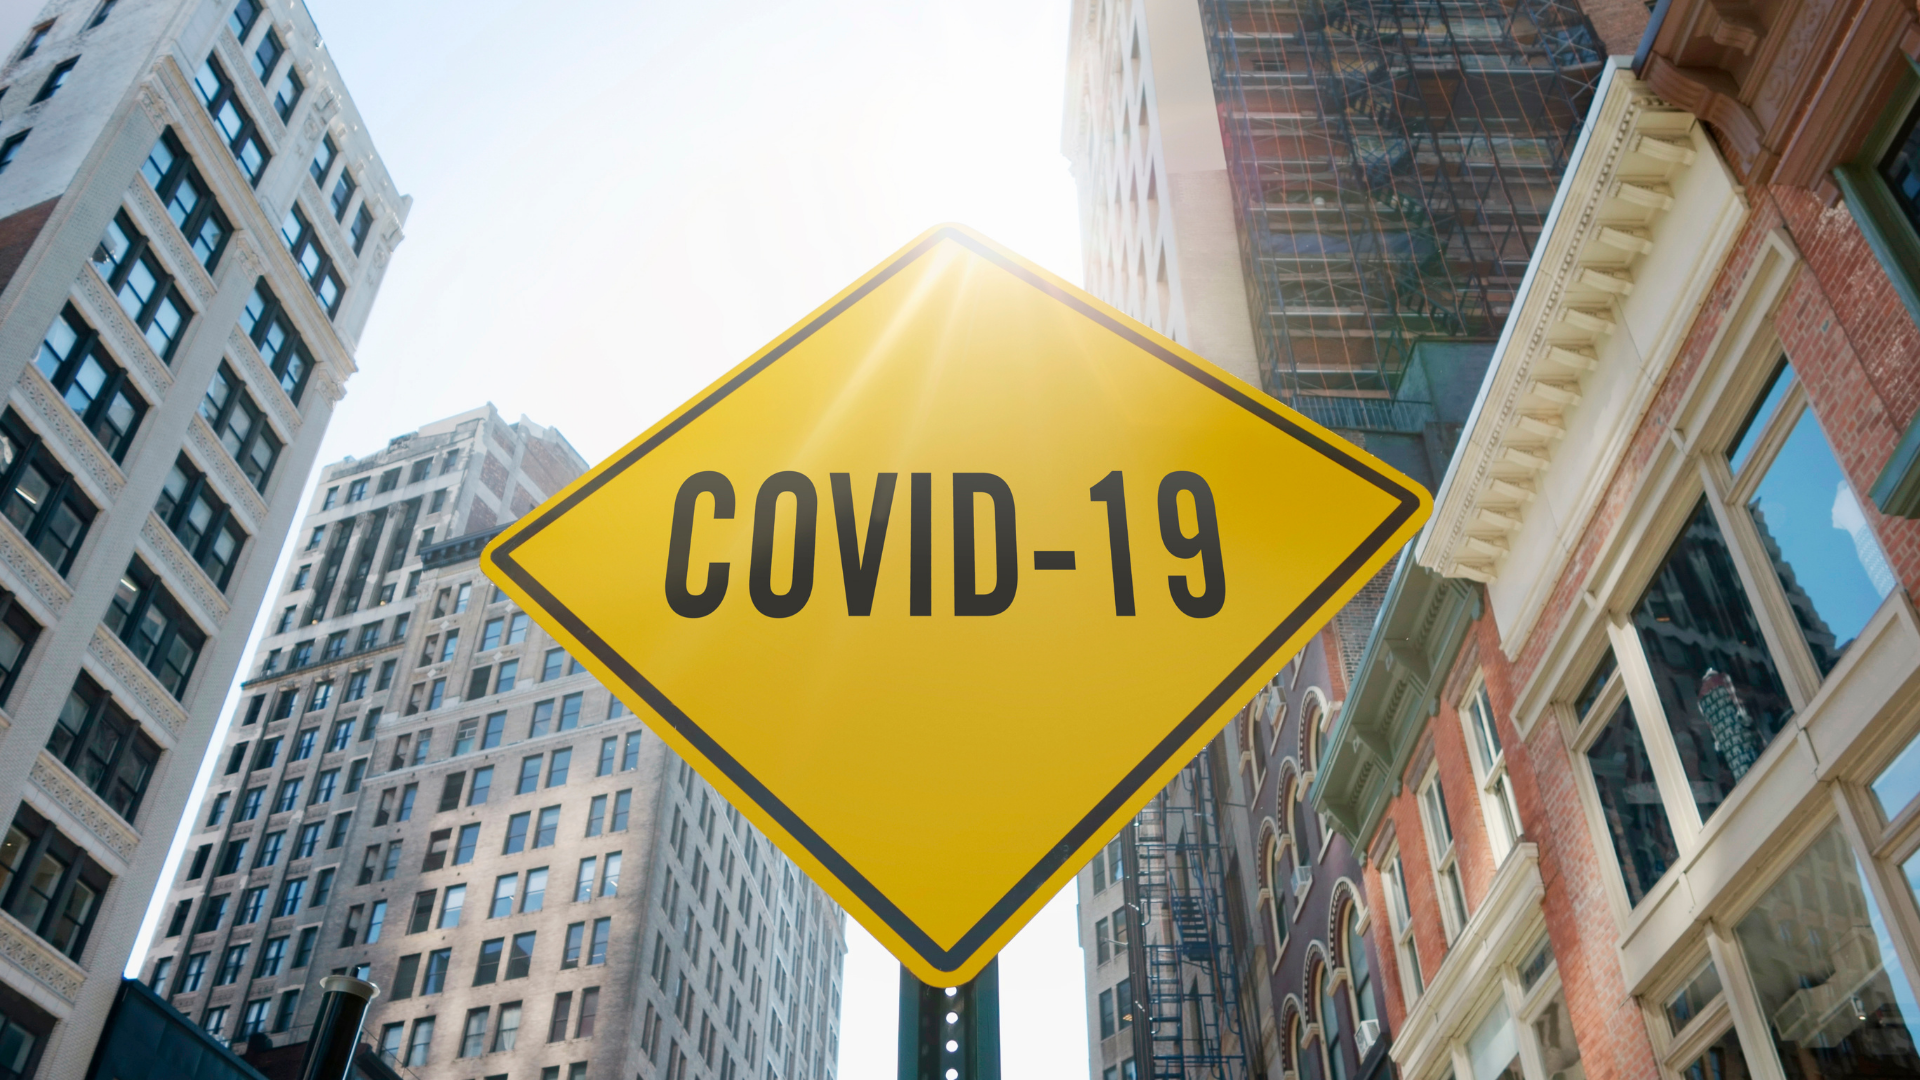 COVID-19 Not Biggest Threat to Your Business